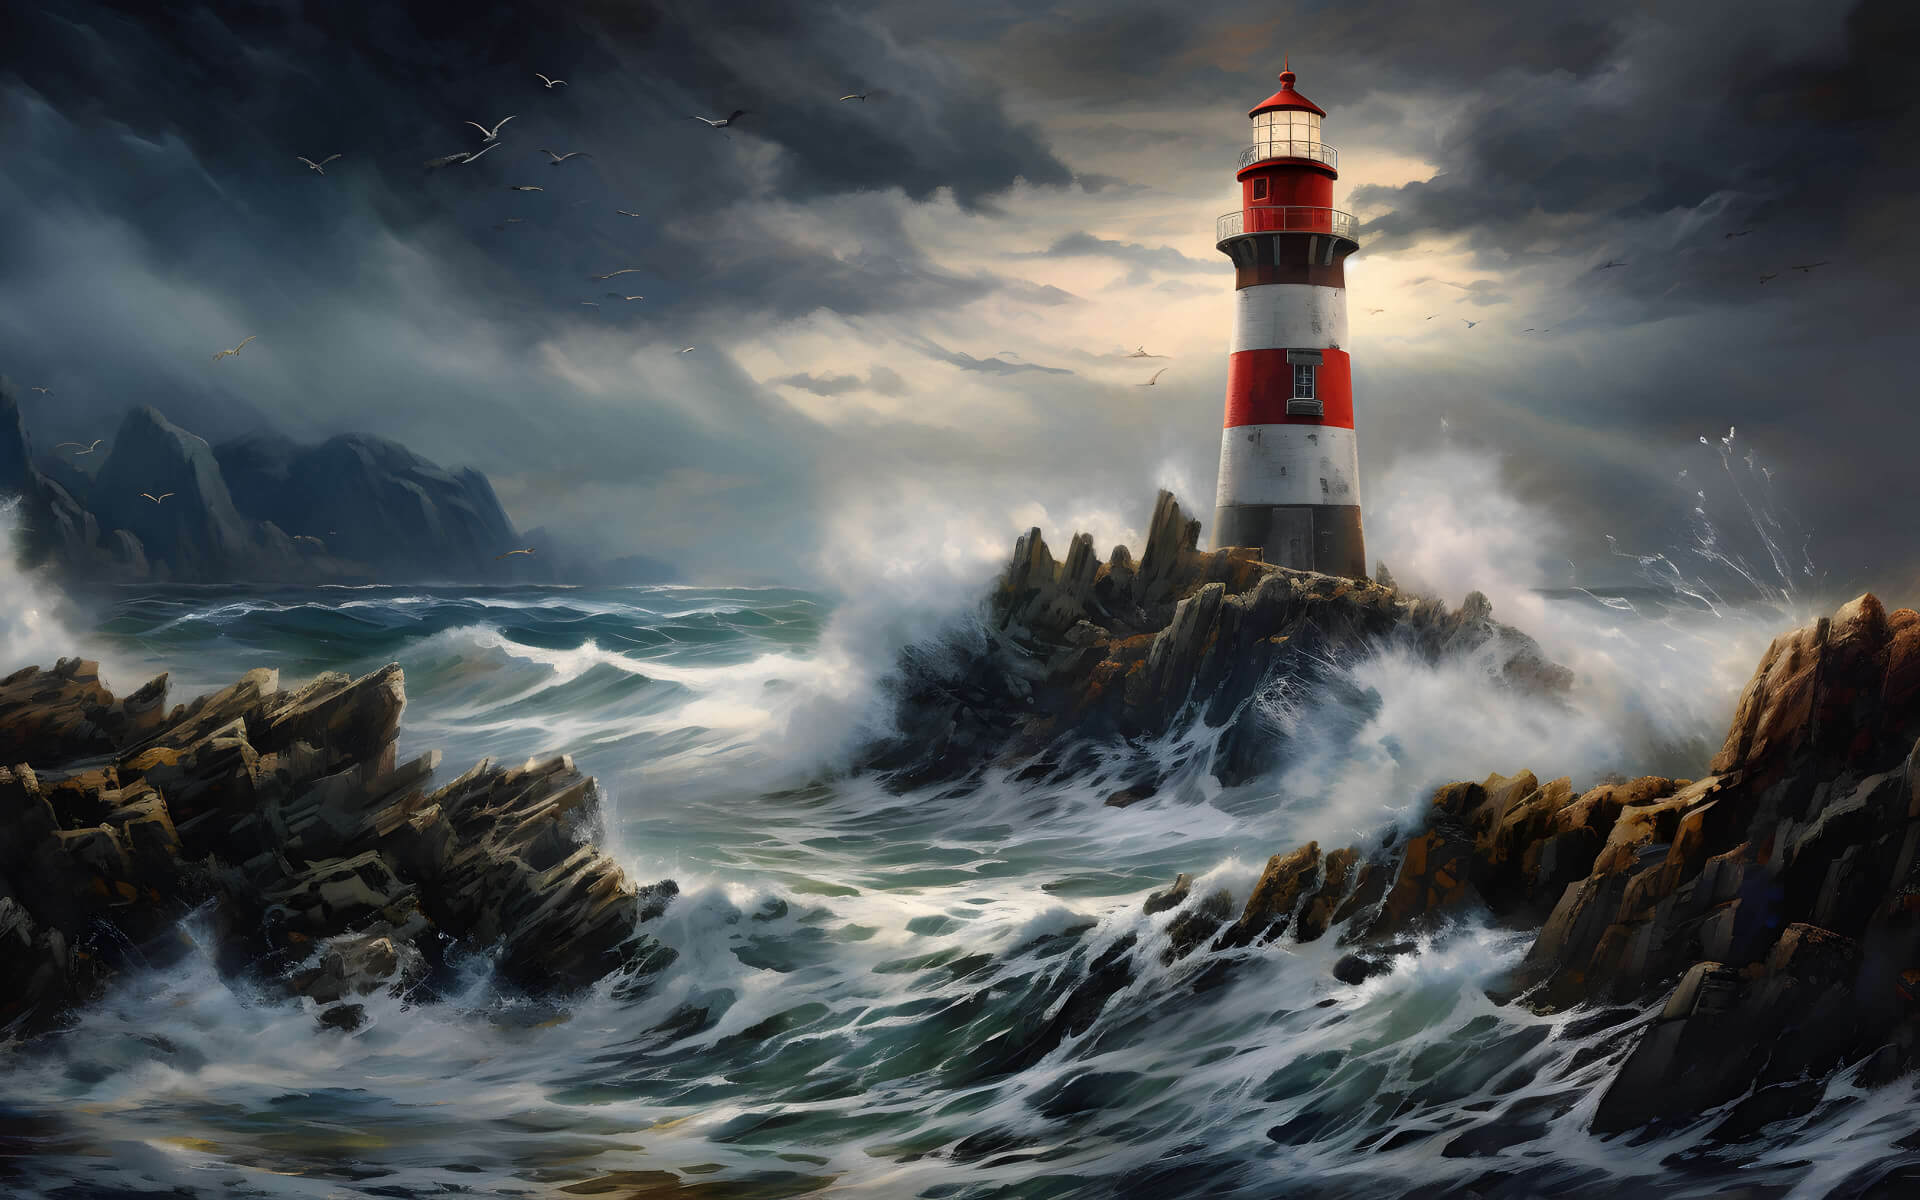 Lighthouse in the ocean waves wallpaper 1440x900